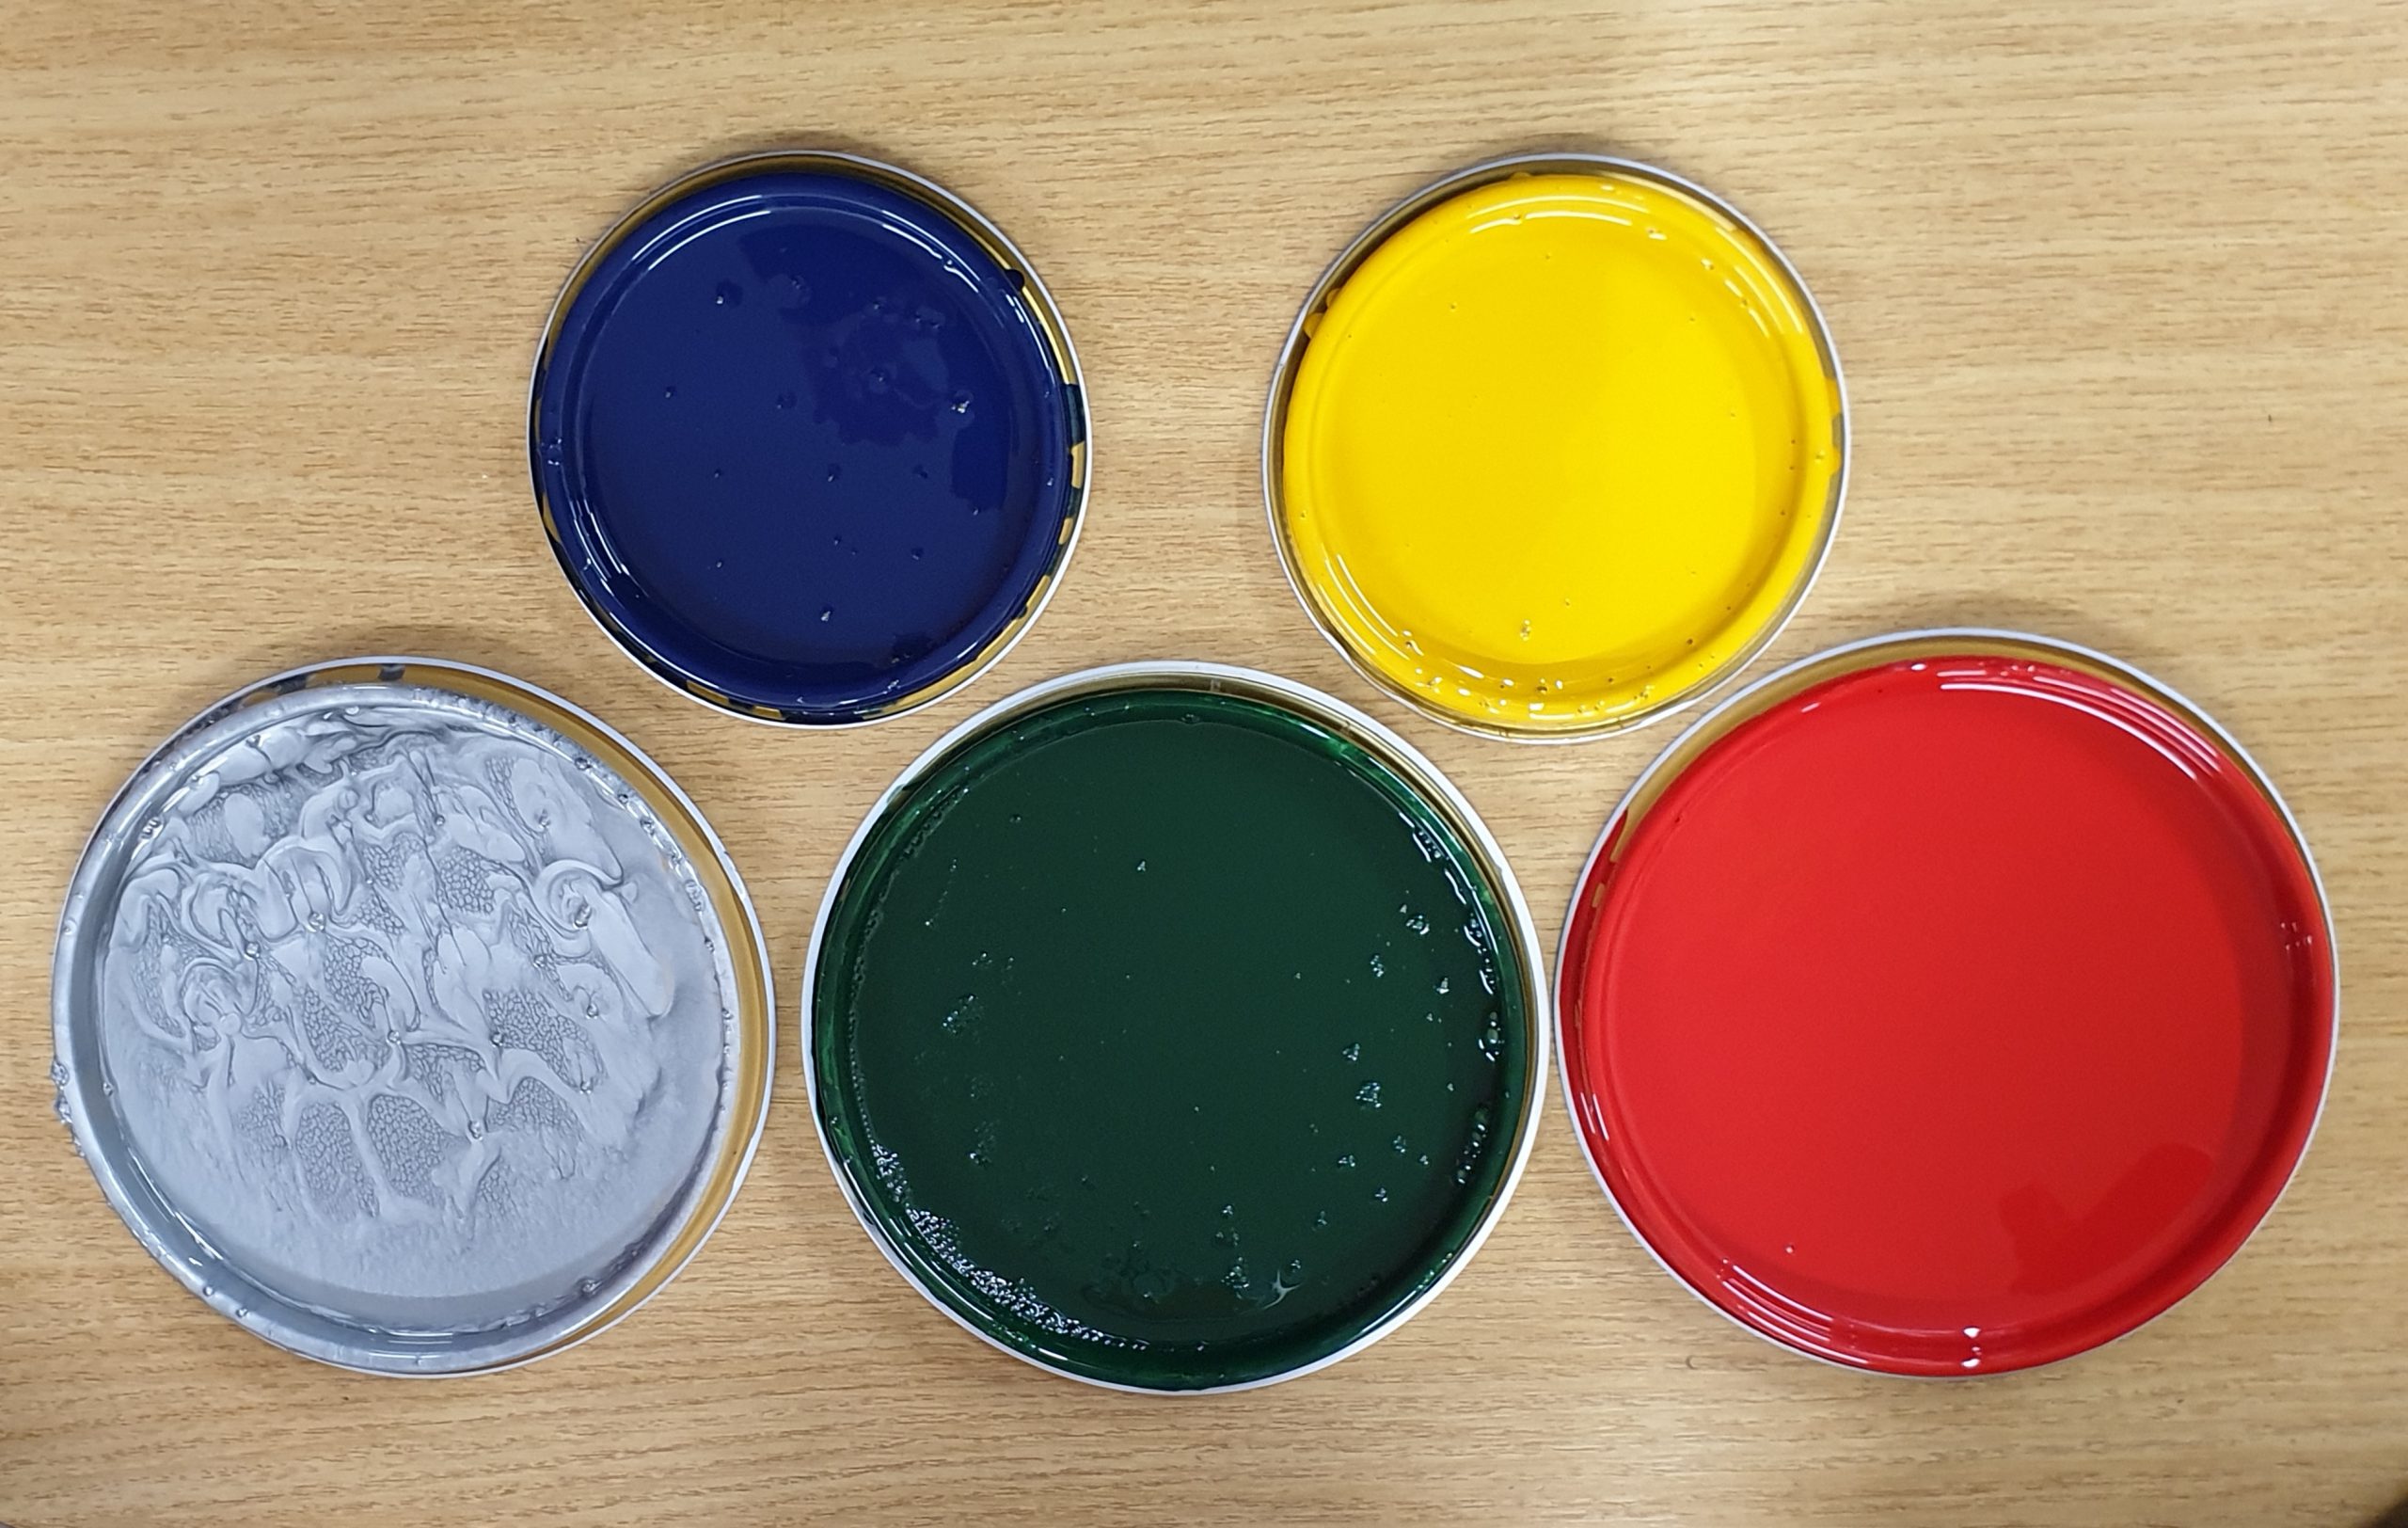 Our Top Five Paint Products - Palatine Paints - Sharing the latest trends